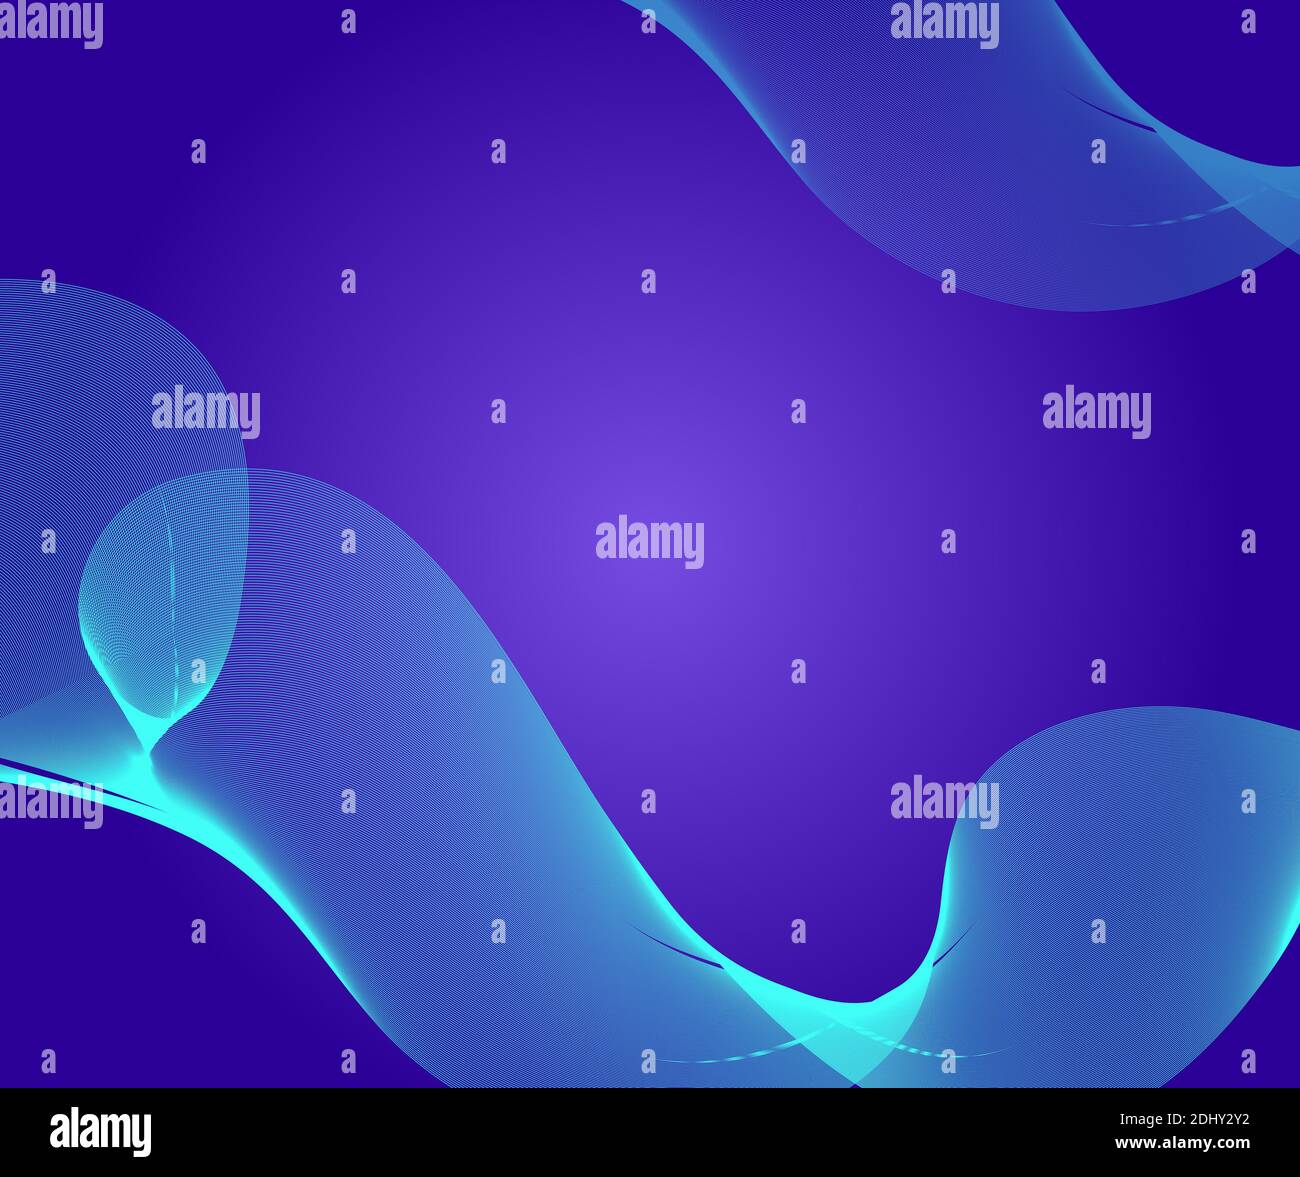 Abstract blue color device background with line waves image Stock Photo